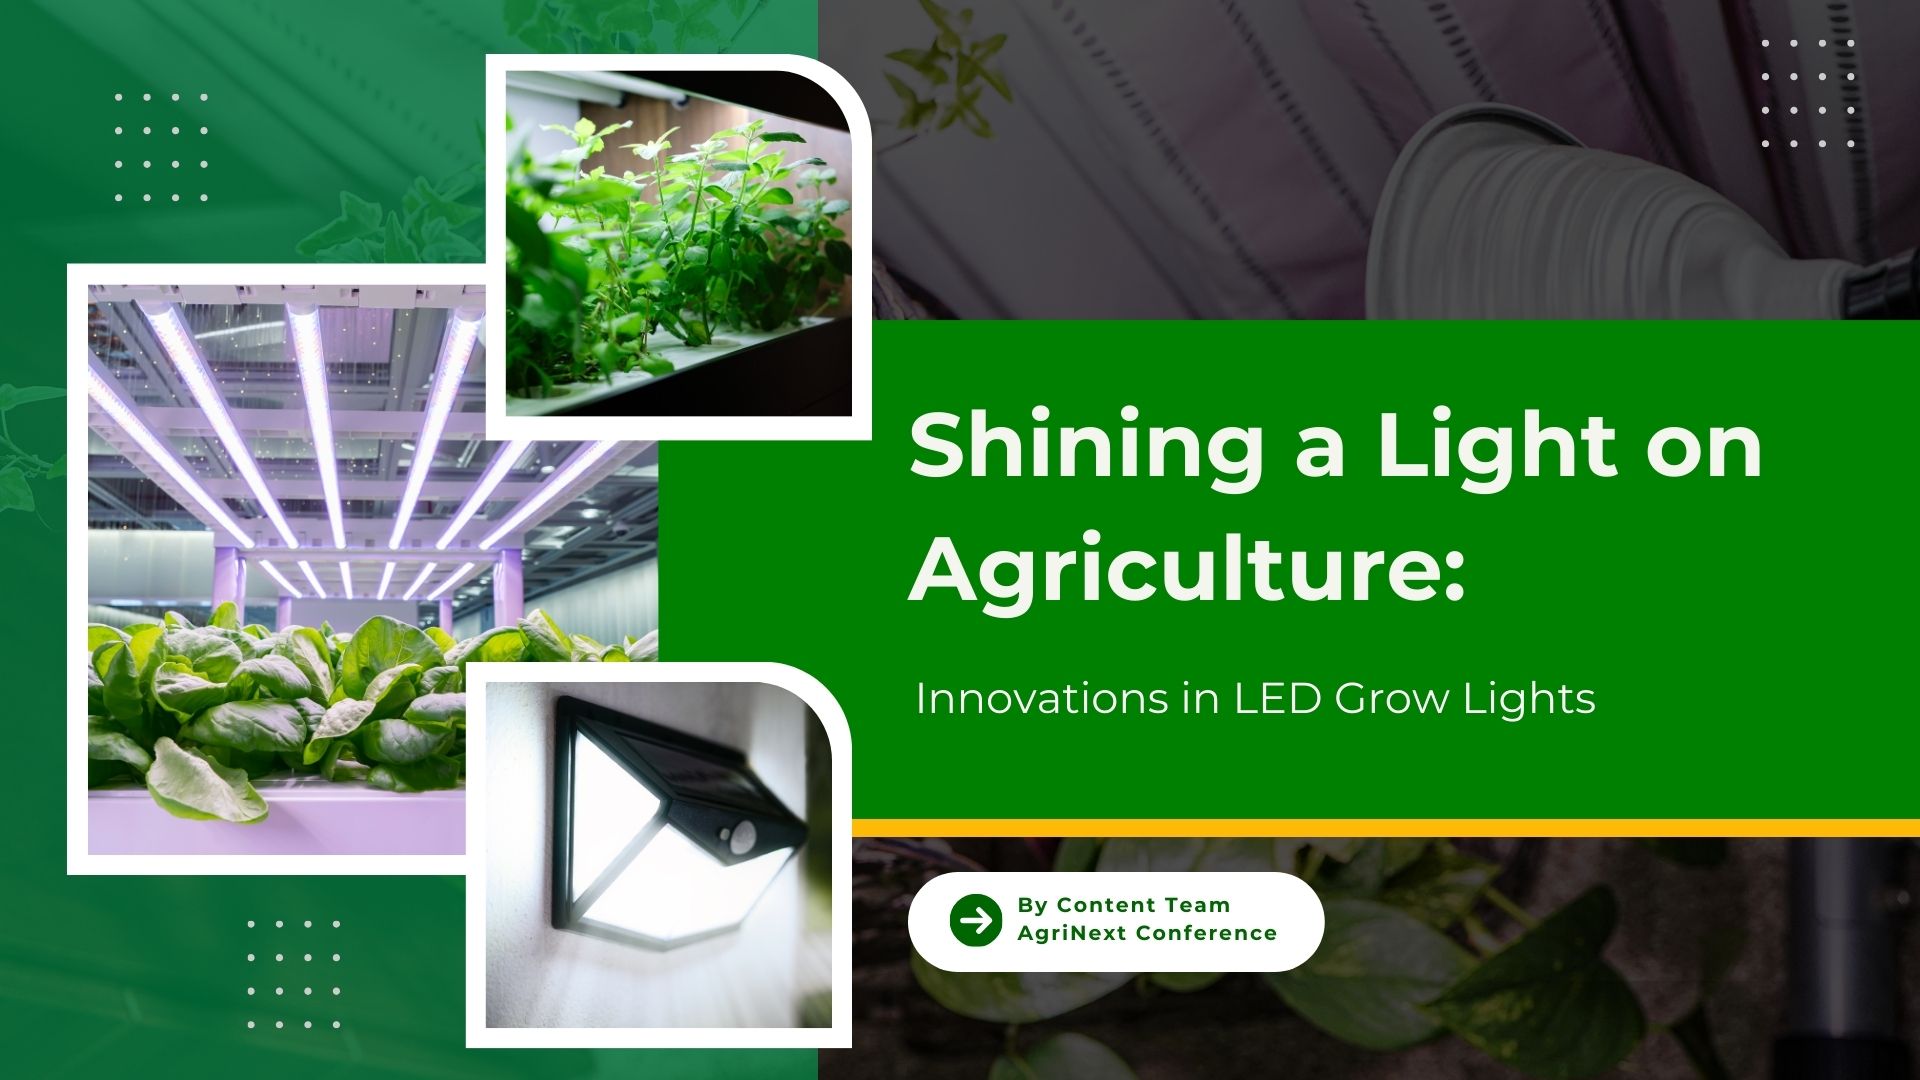 Shining a Light on Agriculture: Innovations in LED Grow Lights